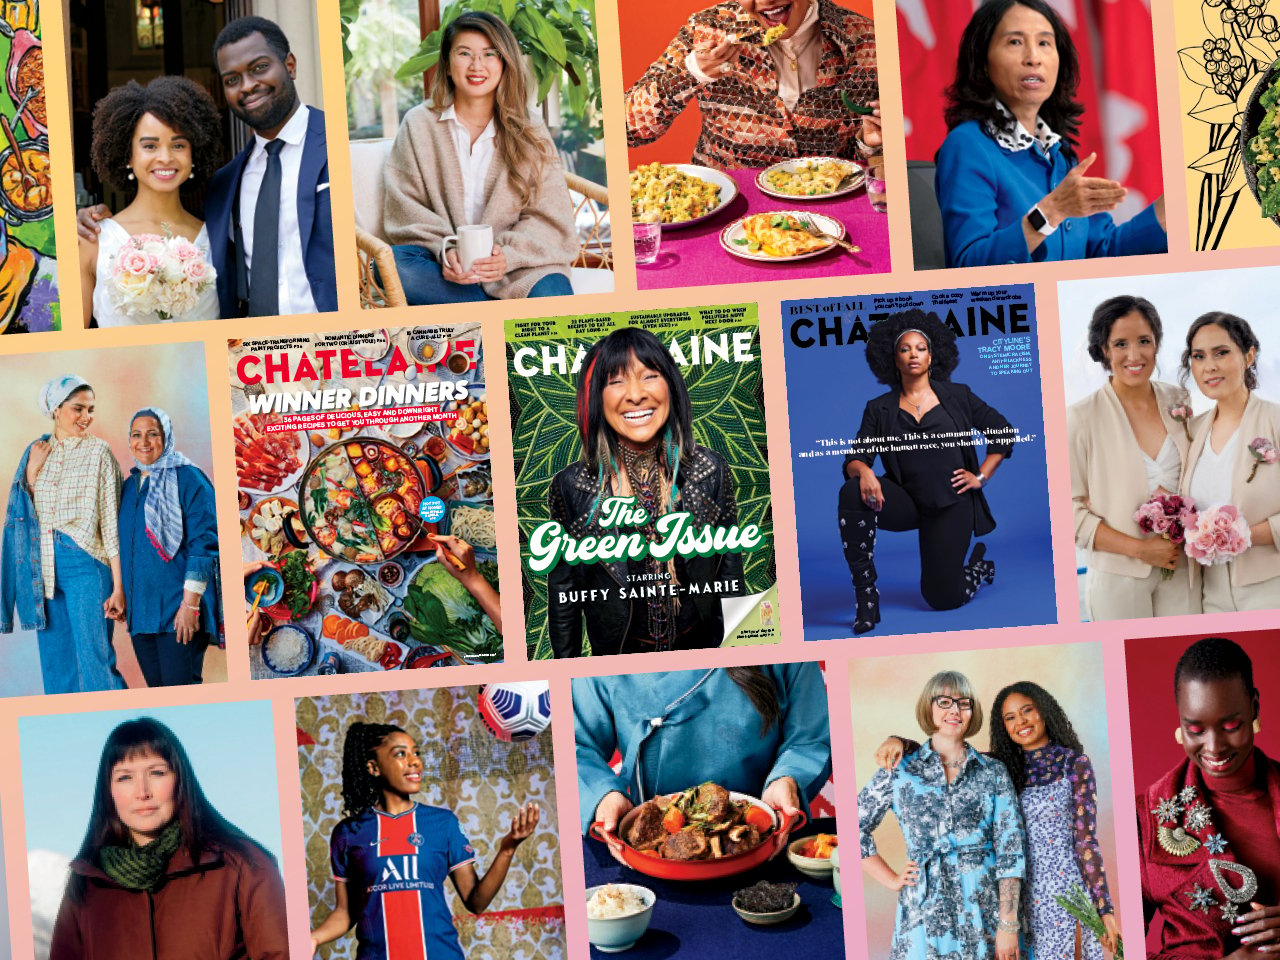 A collection of Chatelaine covers and imagery from 2020-2021